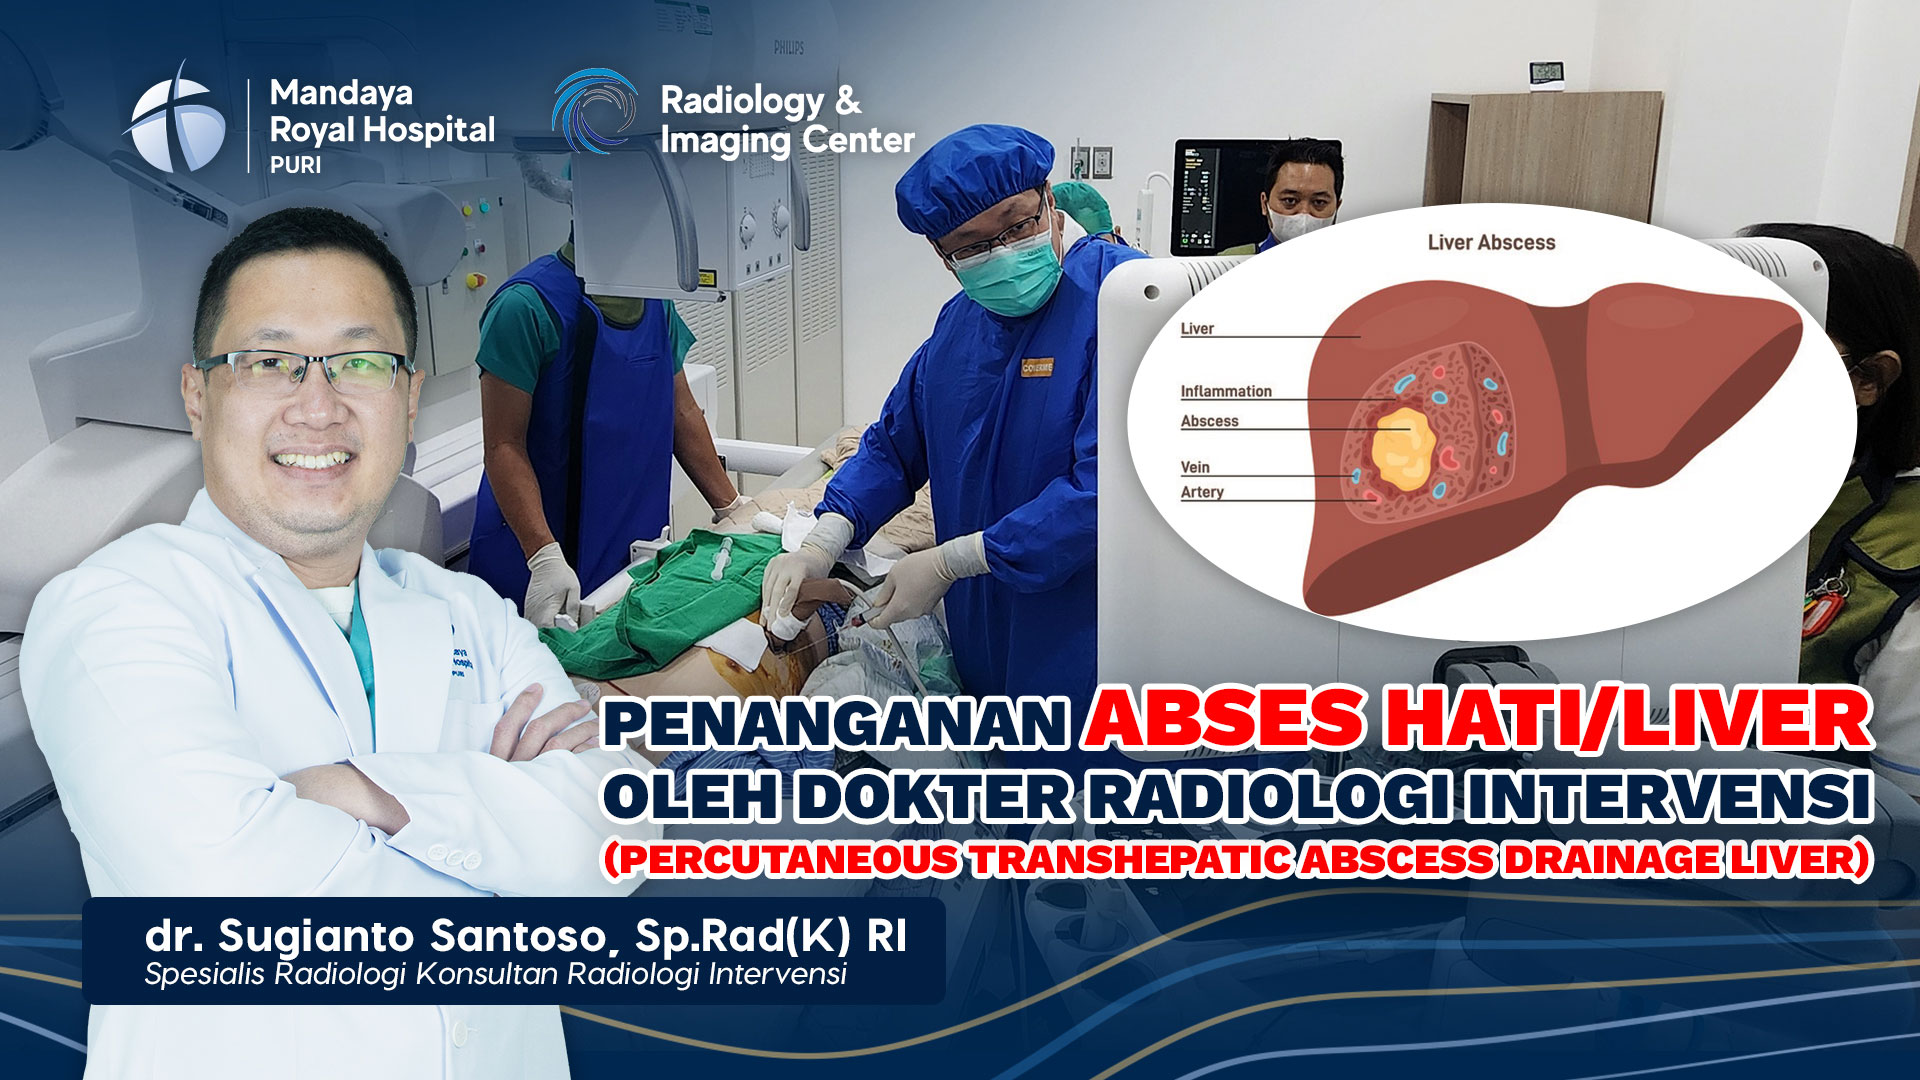 Treatment of Liver Abscess by Interventional Radiologists